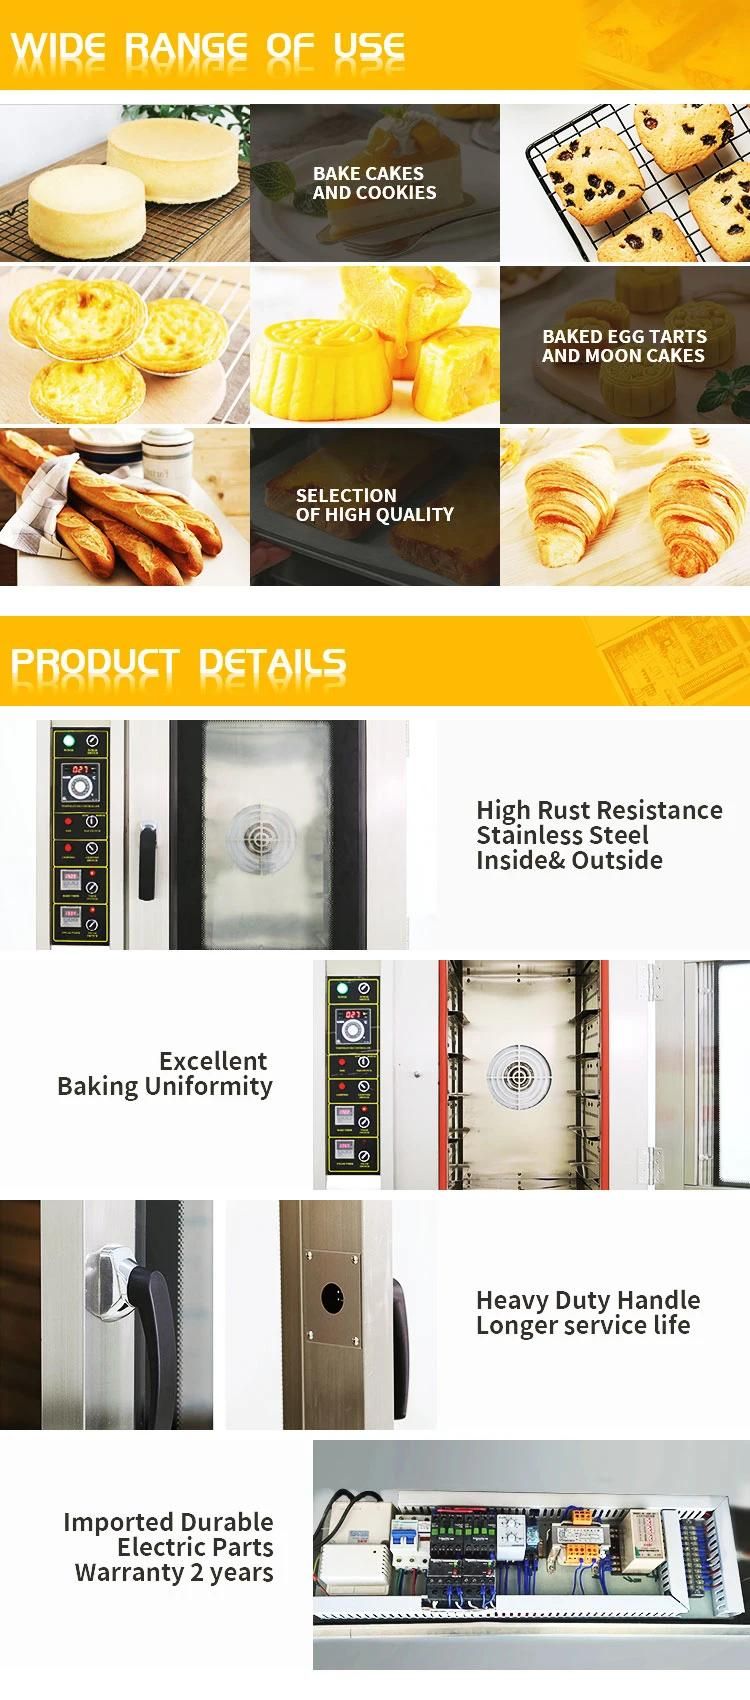 Hongling 8 Trays Gas Convection Oven/Hot Air Machine